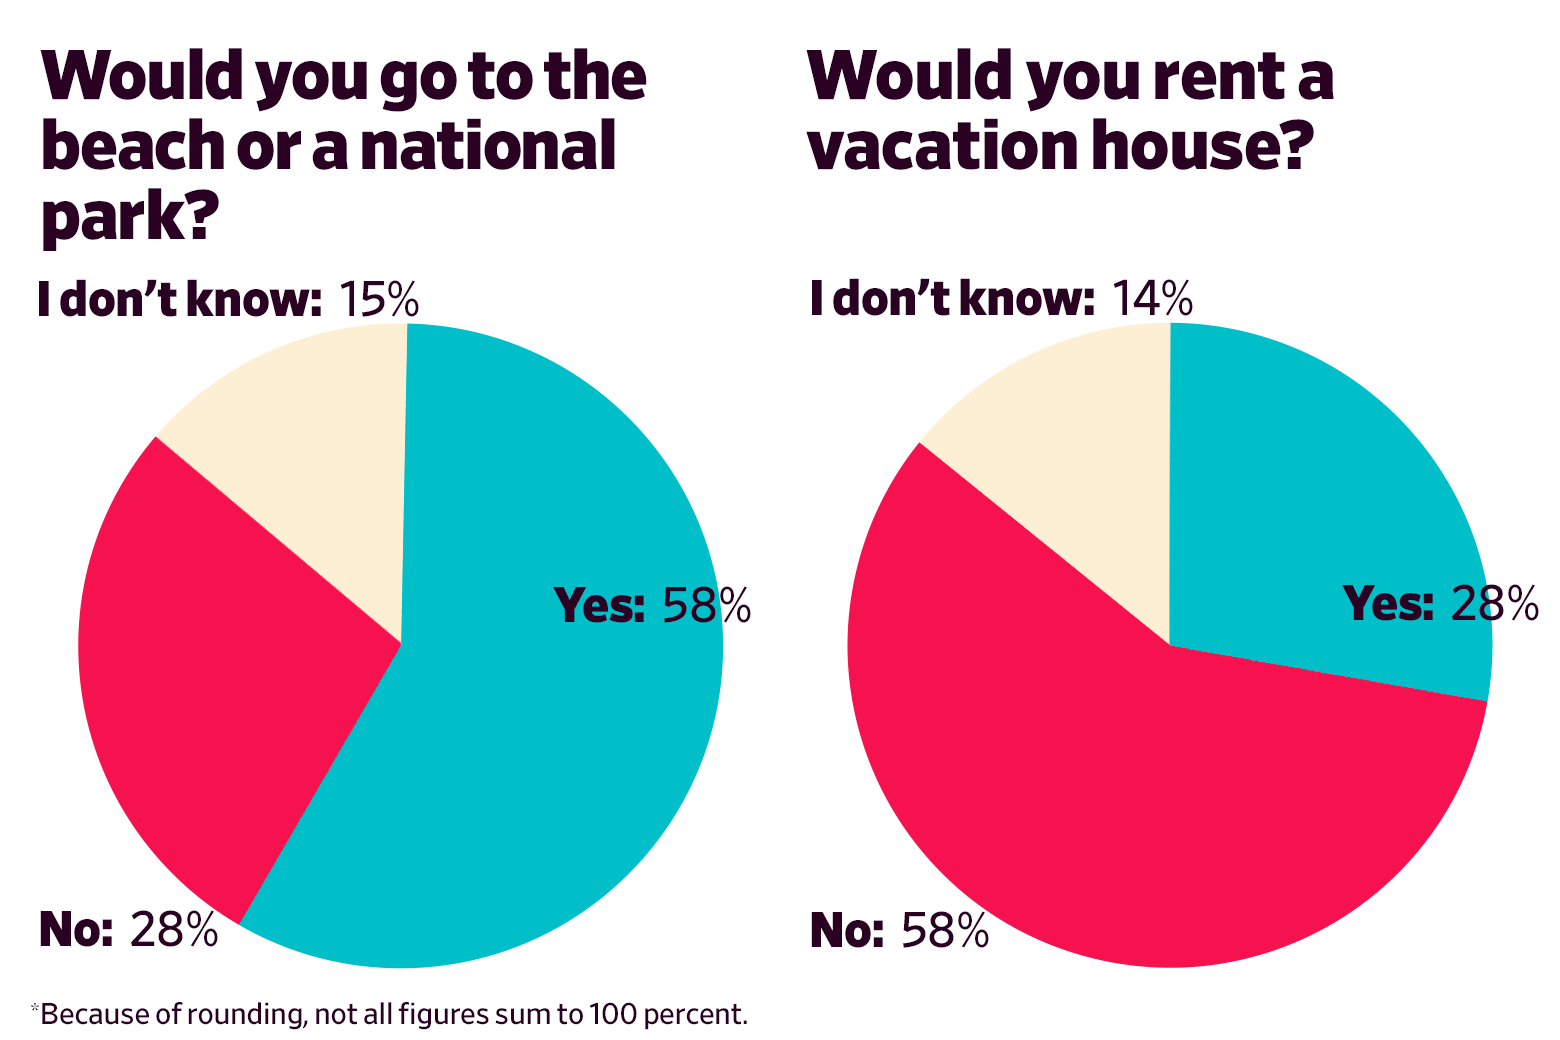 Would you go to the beach or a national park? Yes: 58 No: 28 I don’t know:  15